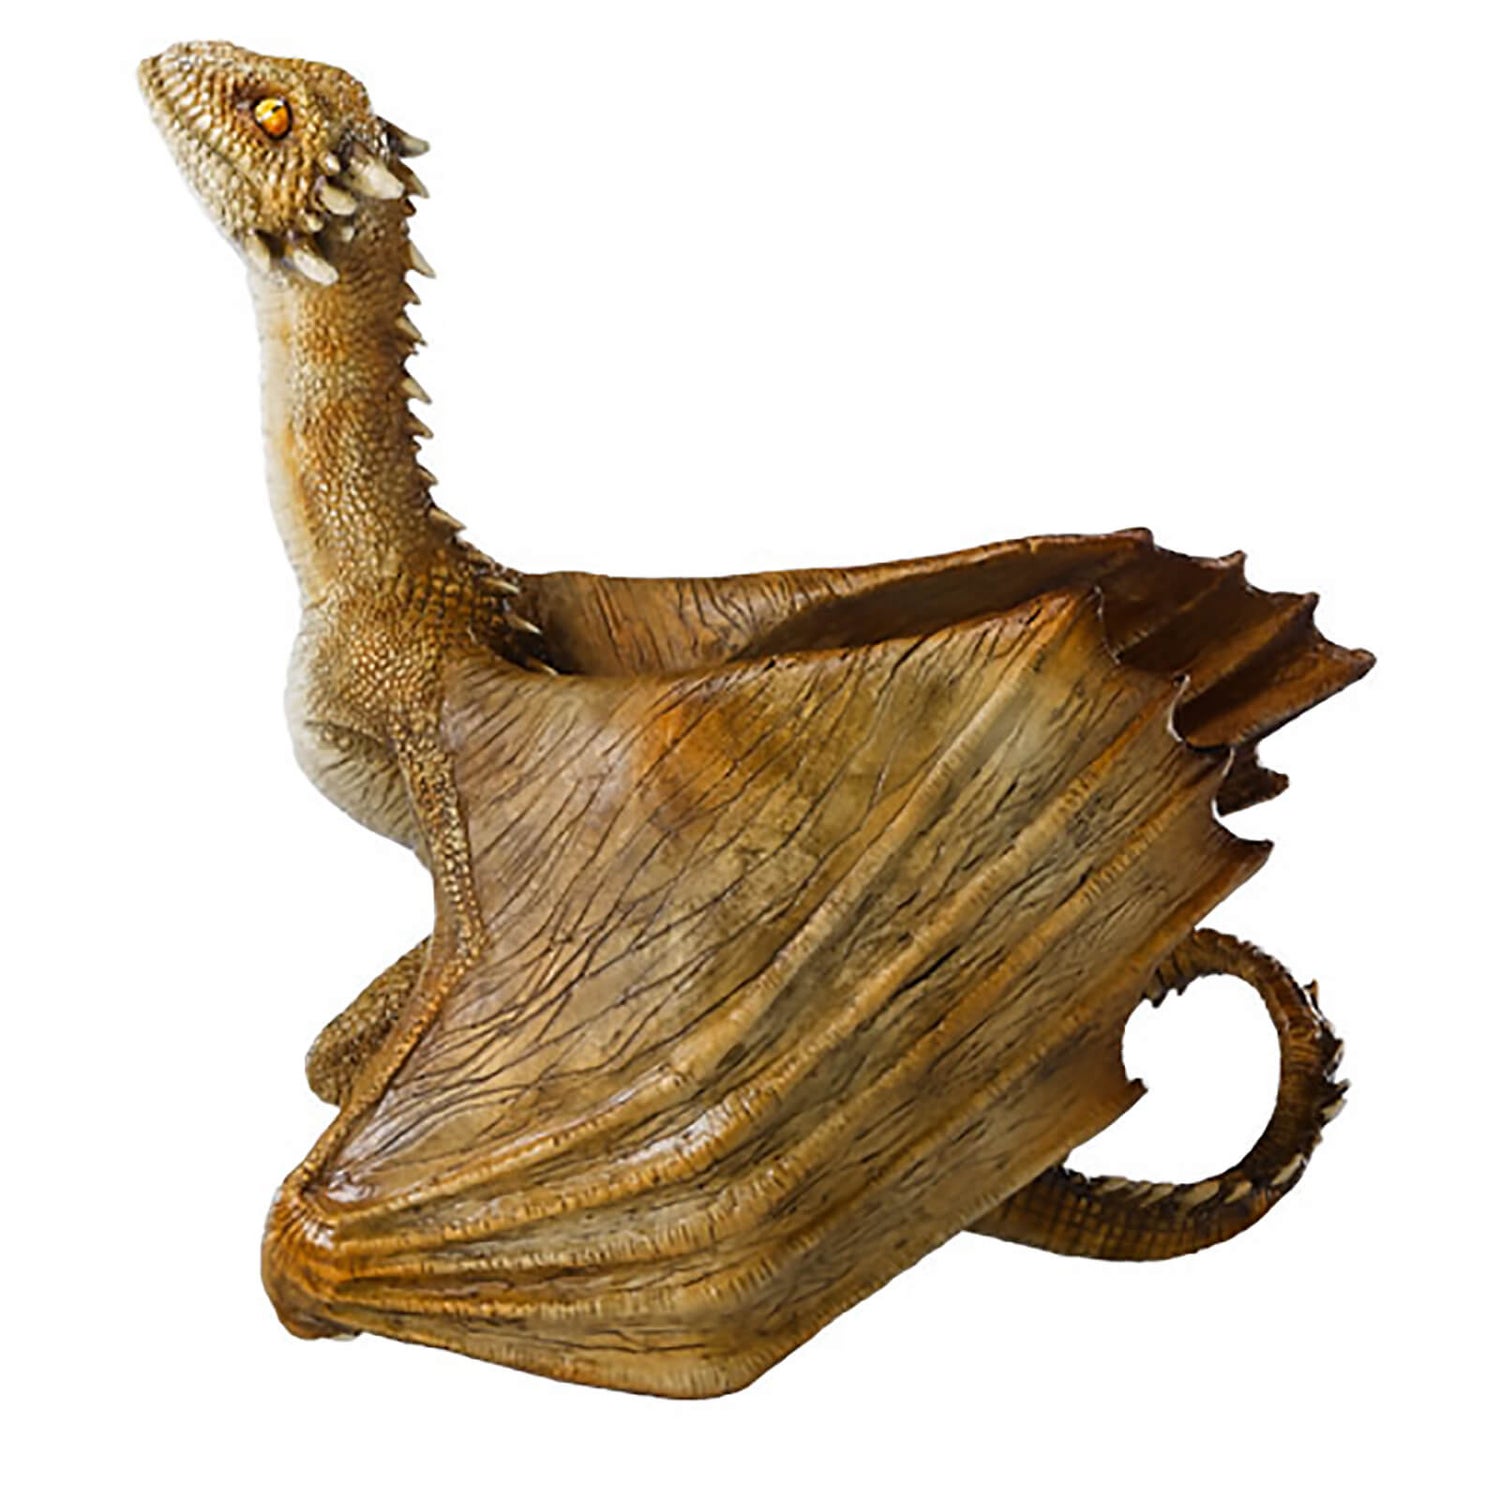 Game of Thrones Viserion Baby Dragon Sculpture